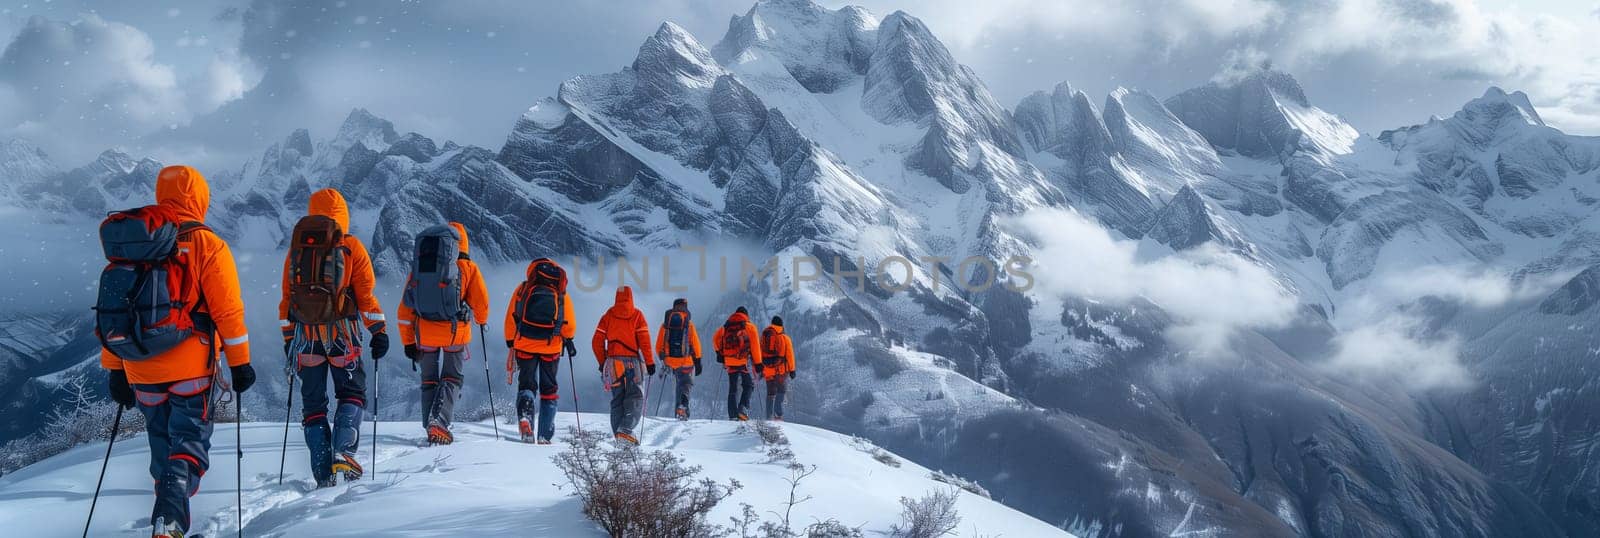 Group traversing snowy mountain slope under cloudy sky by richwolf